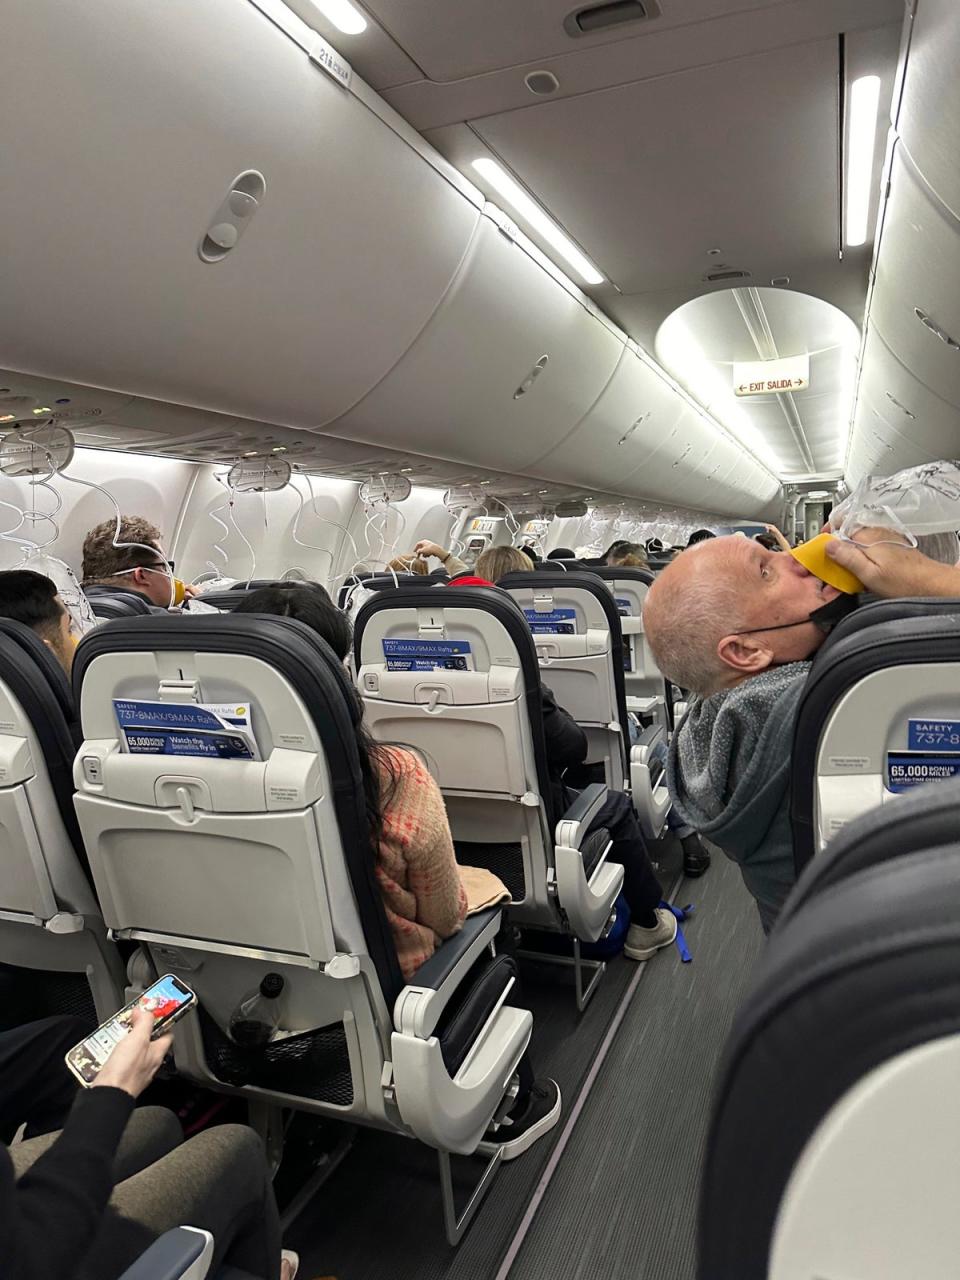 Inspections of the aircrafts have been ordered by federal authorities over concerns that passenger oxygen masks could fail during an emergency (AP)